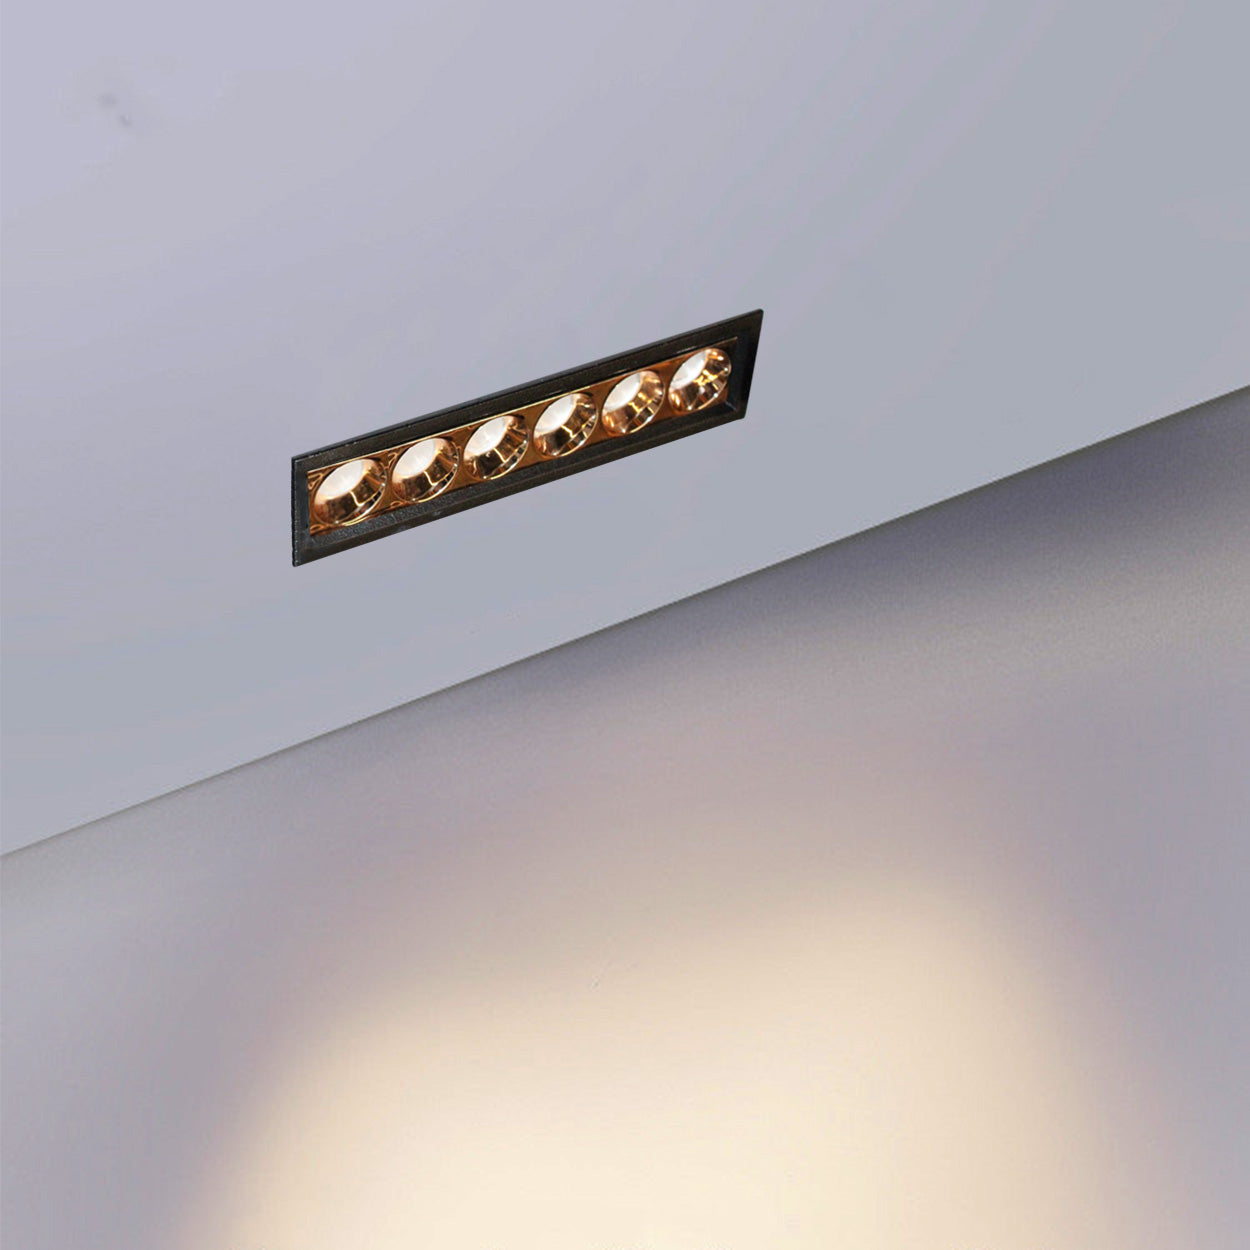 ANKUR DAZZLE LINEAR BLADE RECESSED LED LIGHT